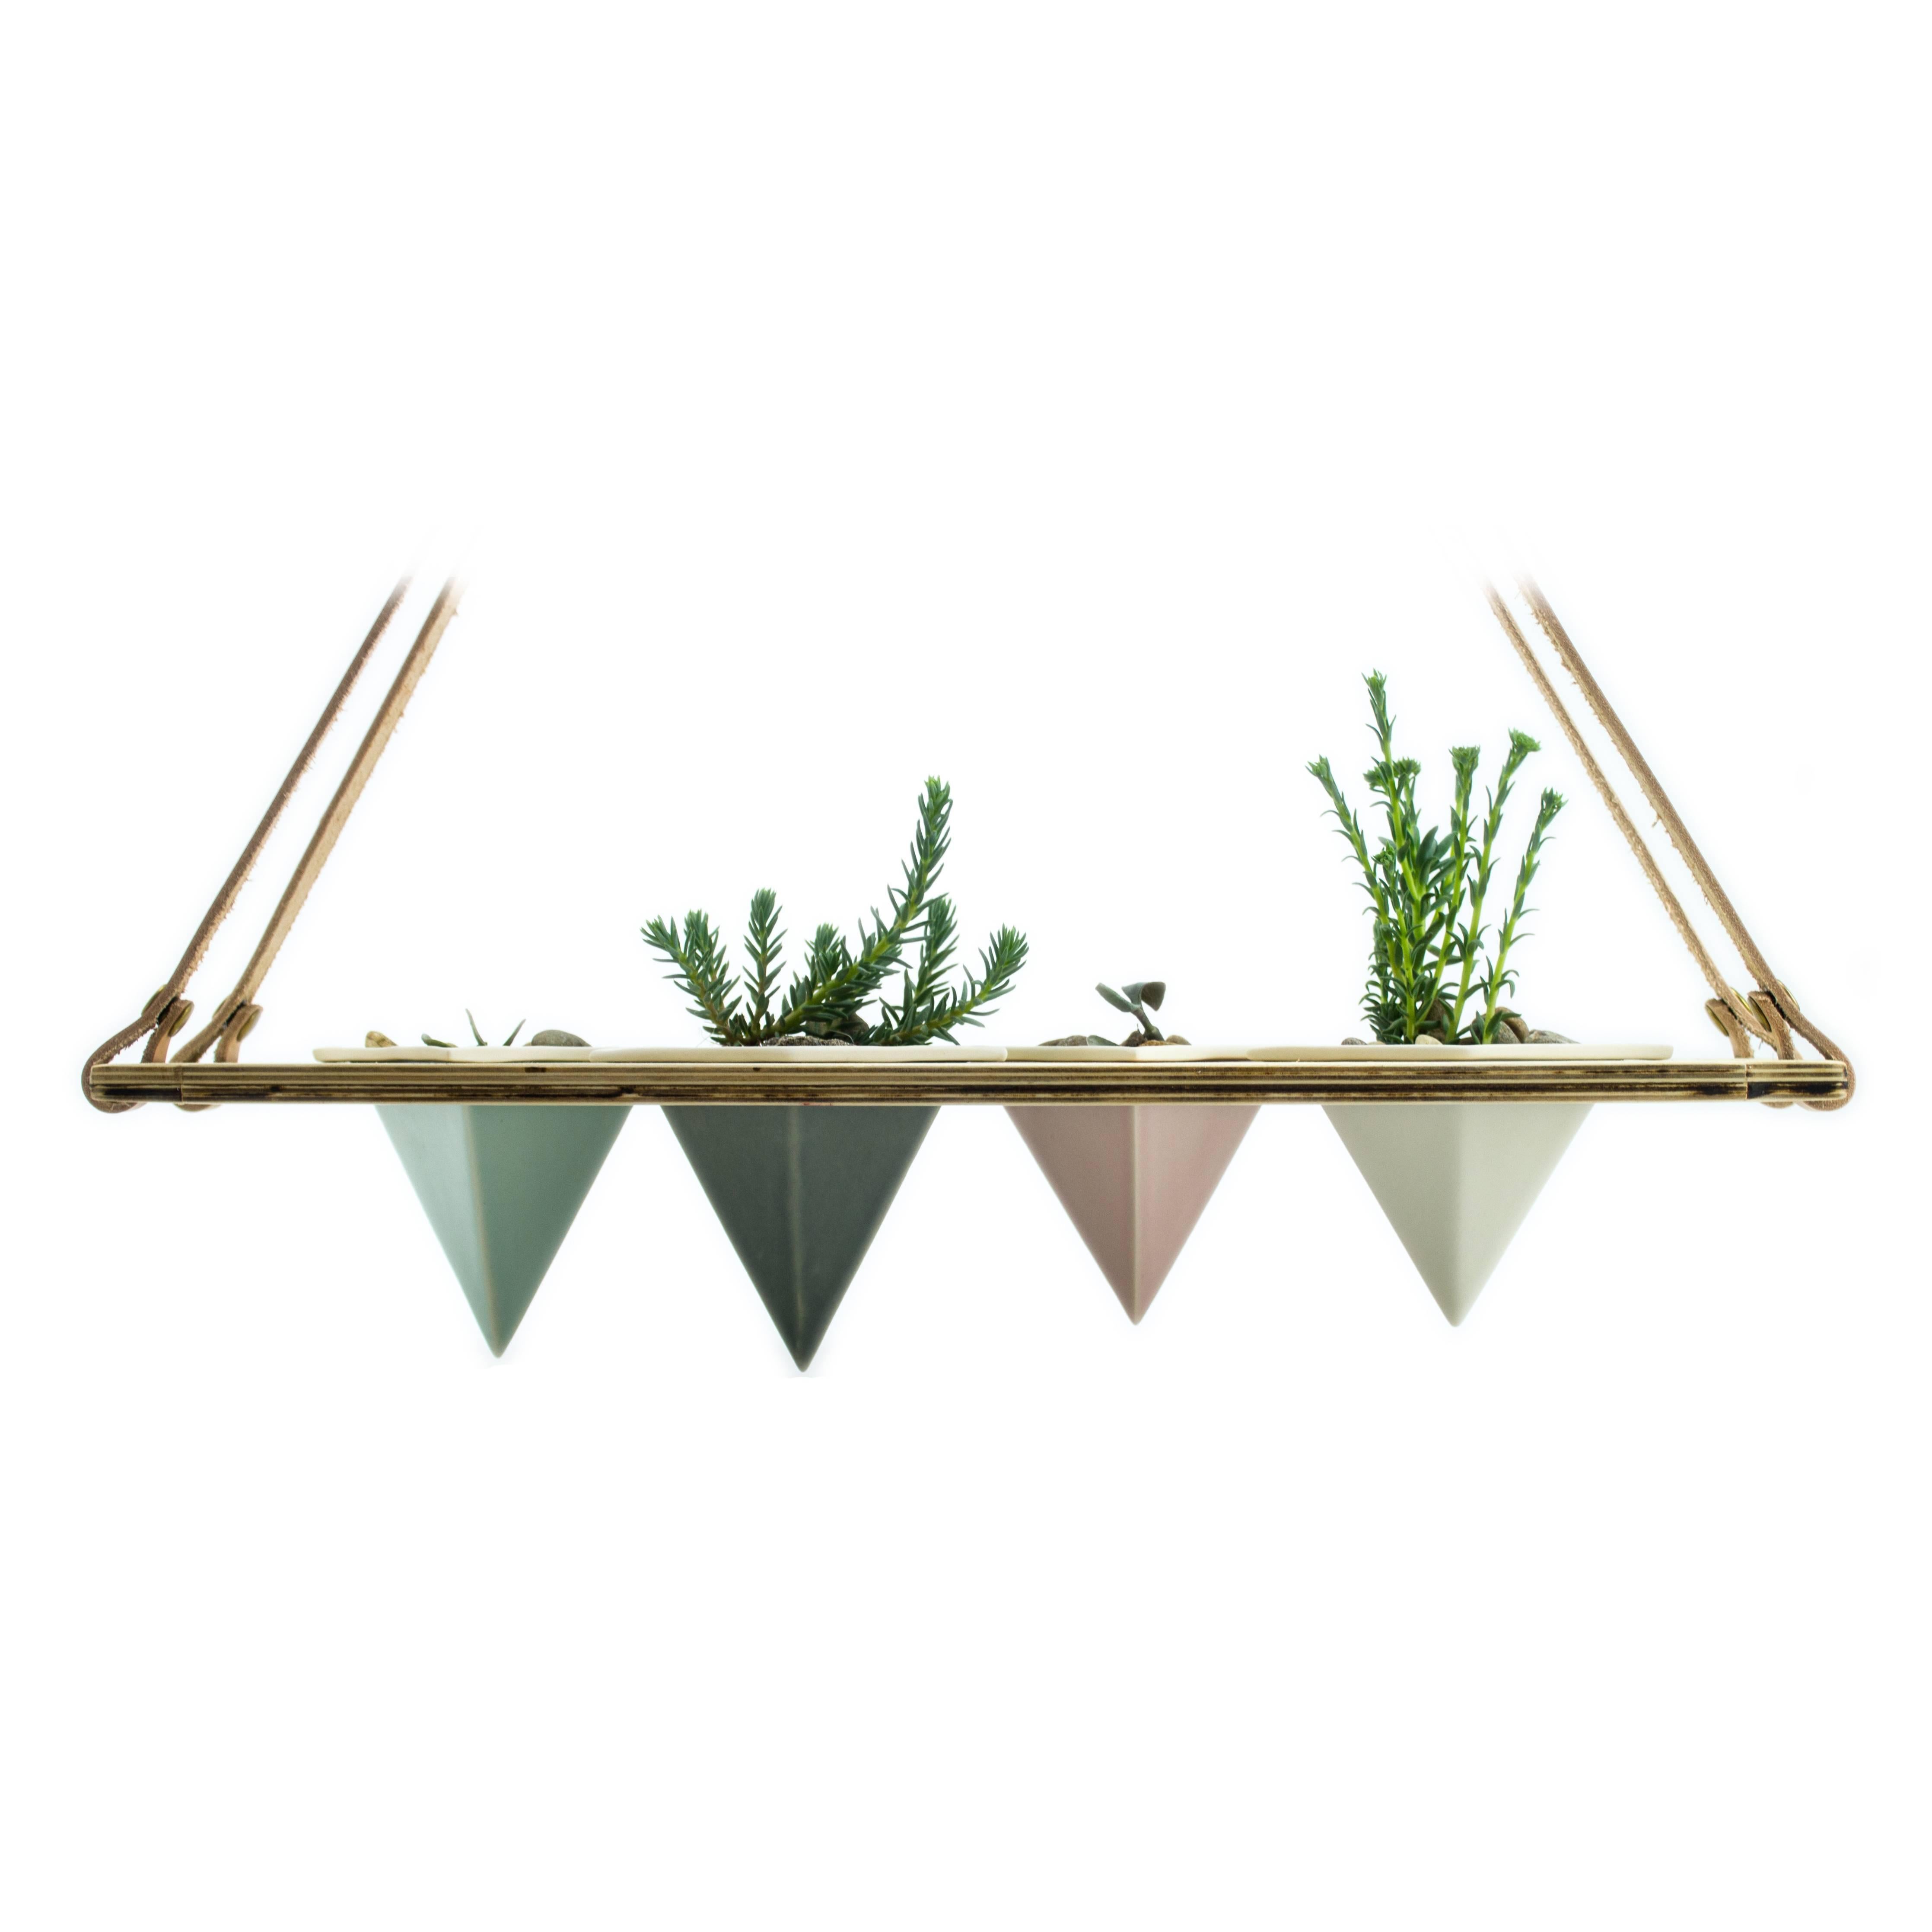 Suspended planter
-A cohesive, beautiful set up for any home - plant your favourite succulents and enjoy the view. Lightweight combination of porcelain in assorted colors, wood, and leather from In Blue Handmade - a collaboration with In Blue